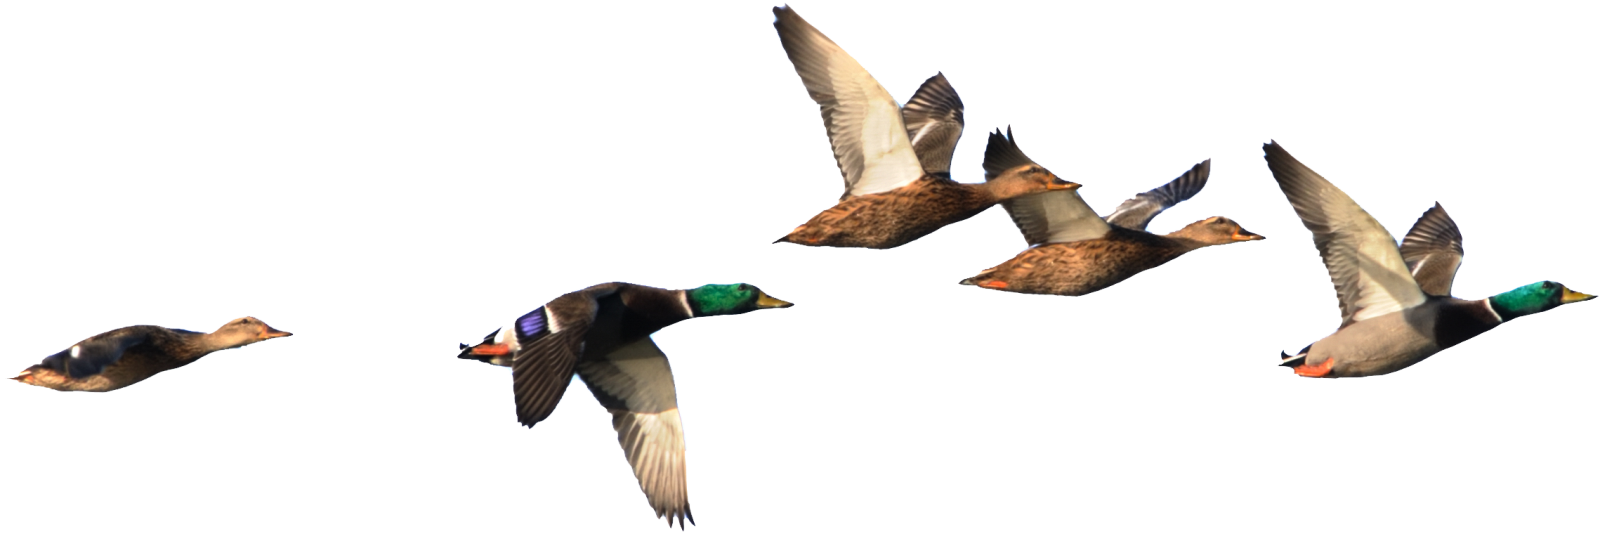 Duck Flying Duck In Flight Png 1600x534 Png Clipart Download